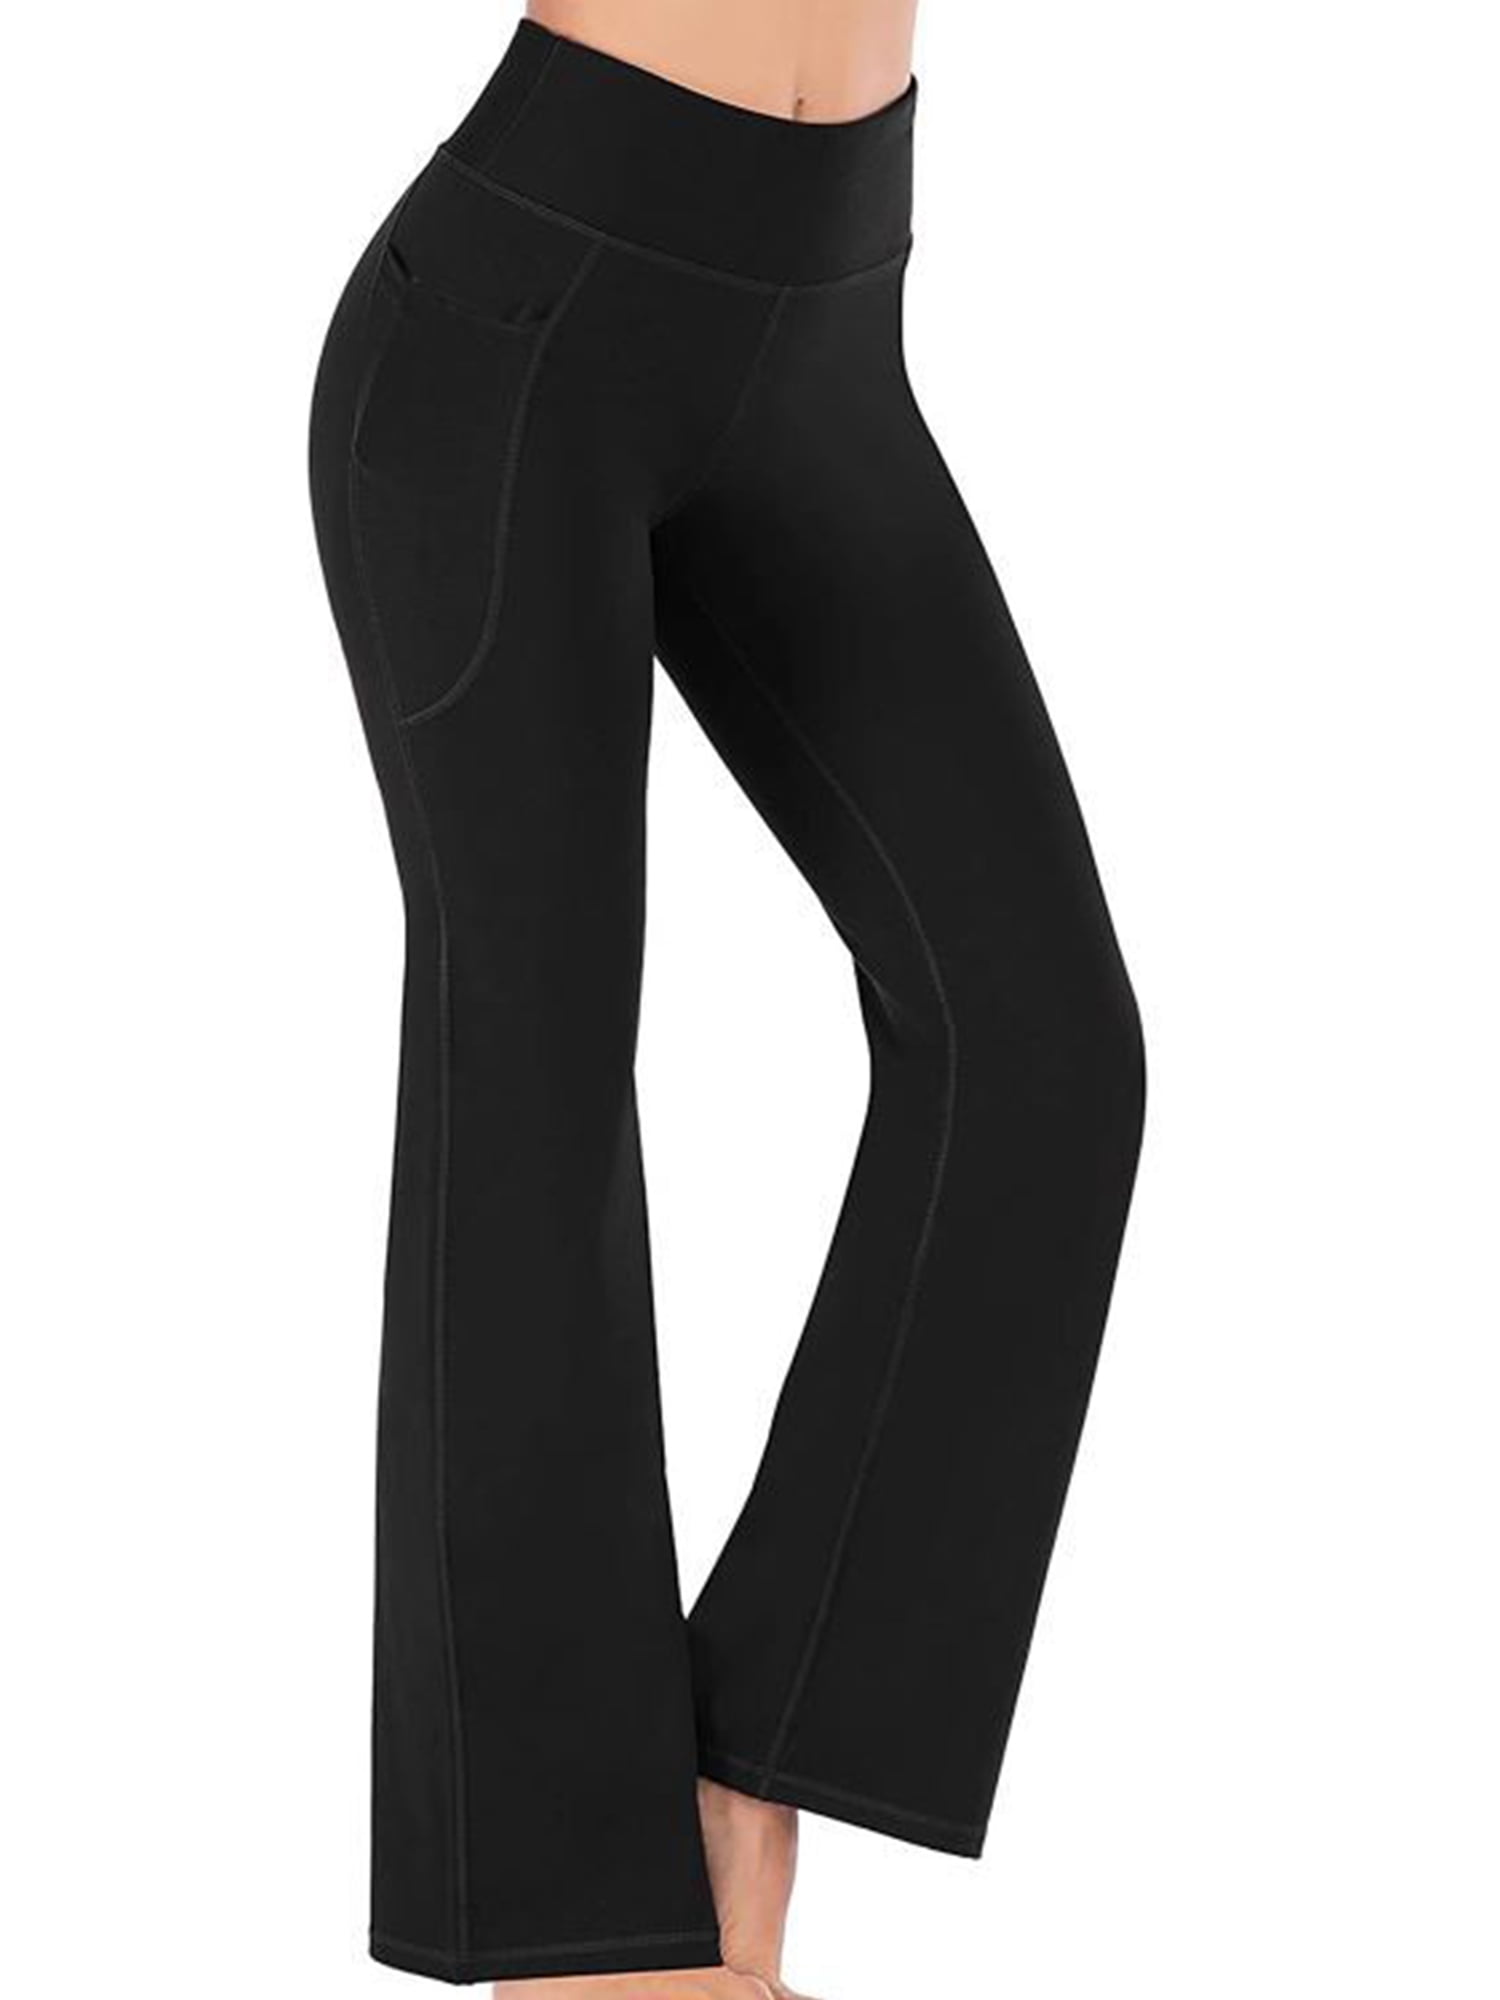 Details about   Women High Waist Yoga Pants Wide Leg Flare Bootcut Stretch Workout Gym Trousers 